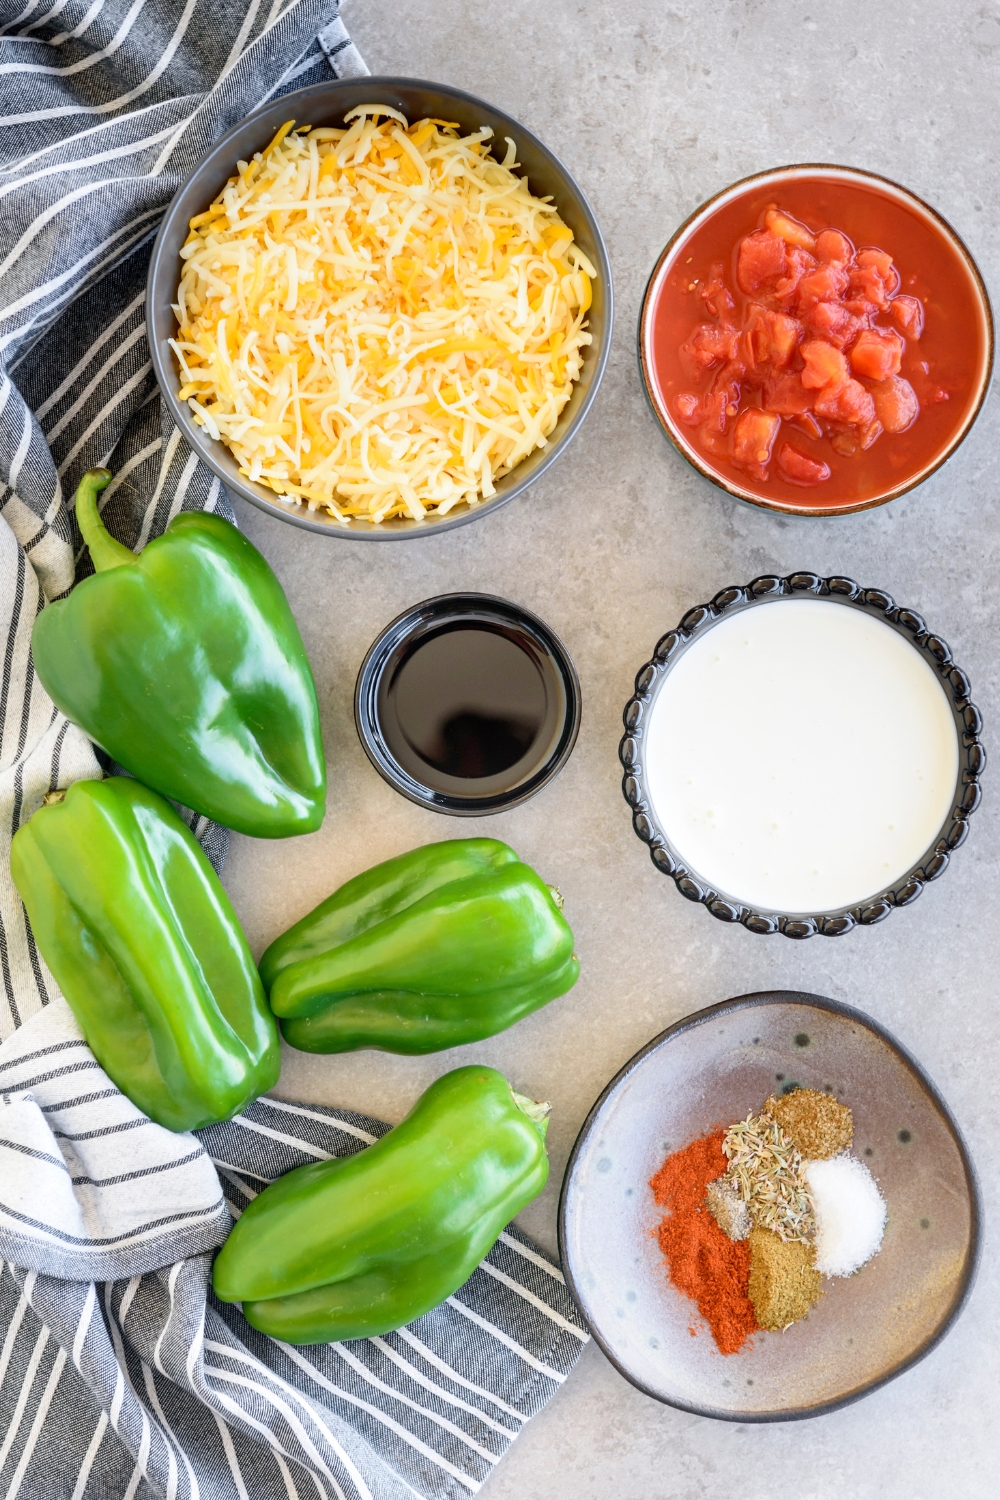 Shredded cheese, diced tomatoes, heavy cream, seasonings, oil, and poblano peppers in various bowls on the counter.